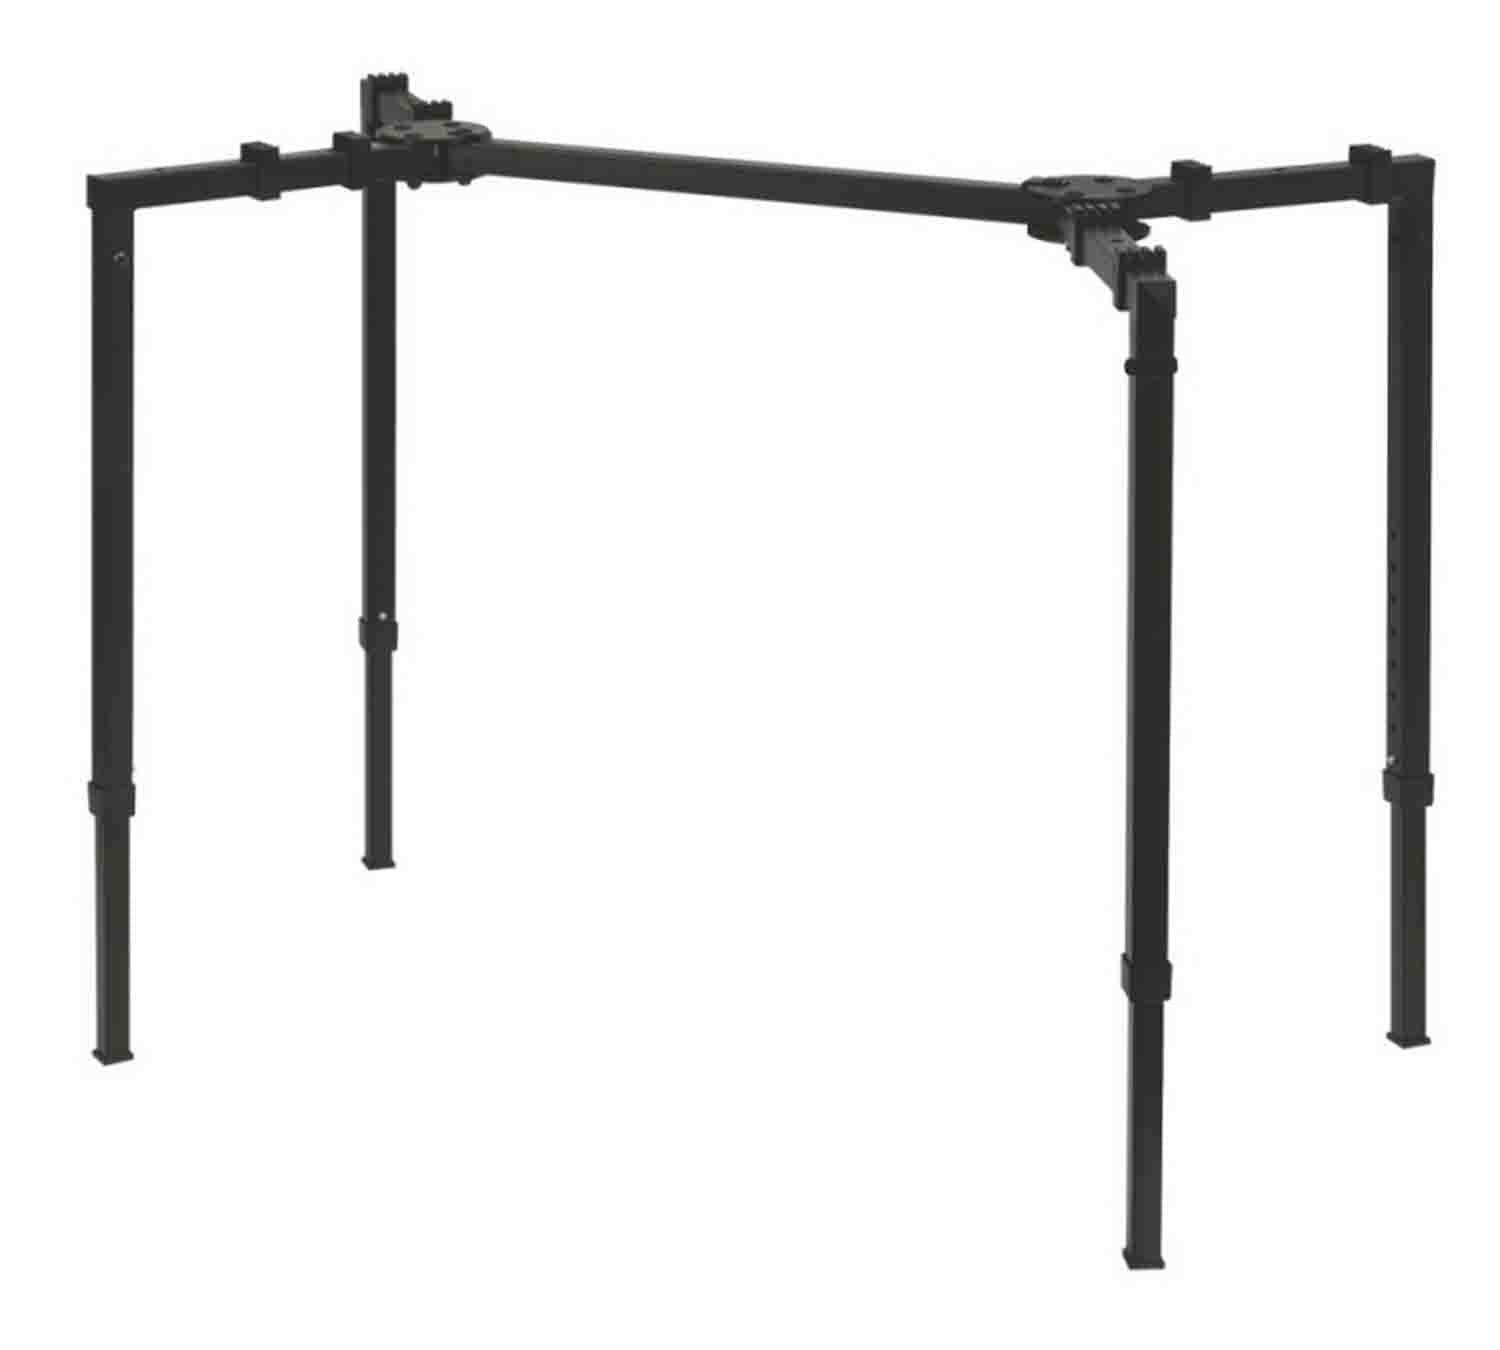 Onstage WS8550 Multi-Function Stand - Black - Hollywood DJ